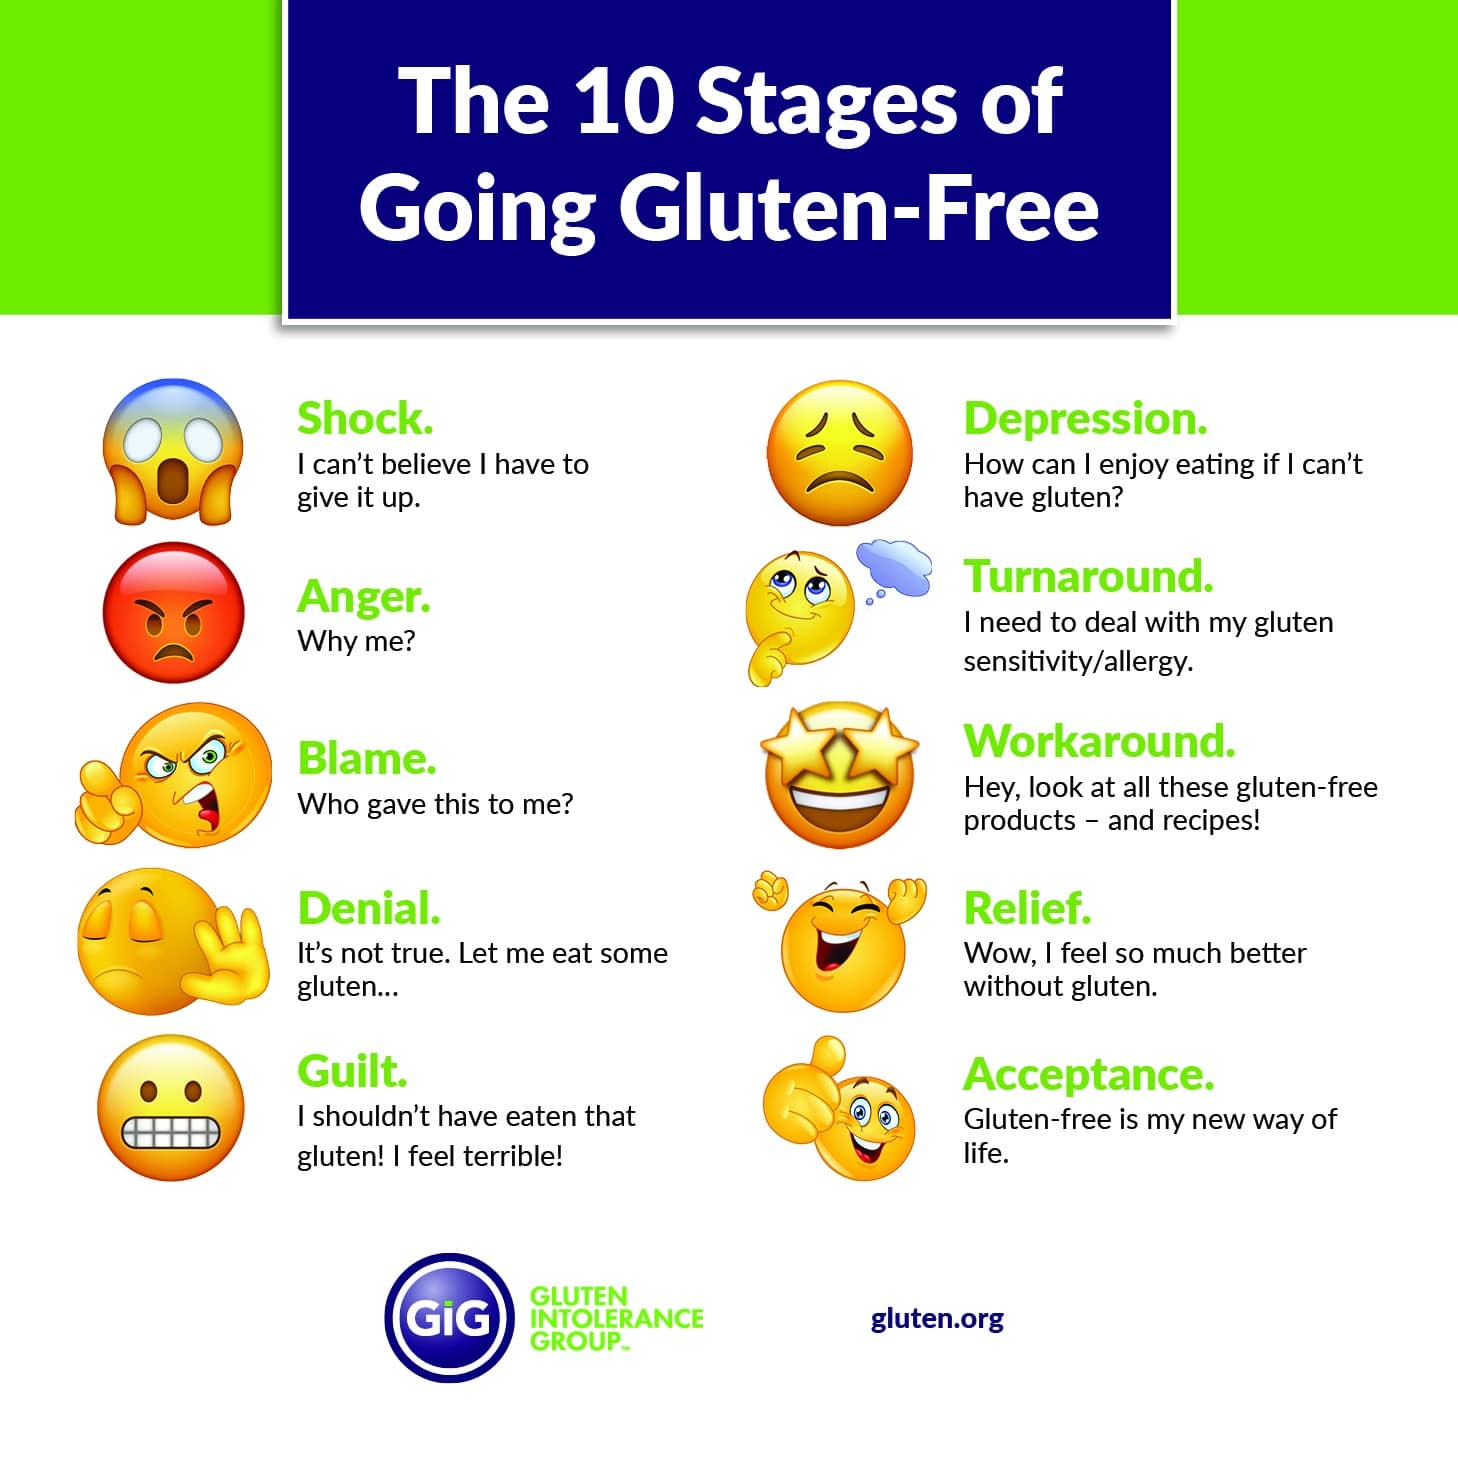 The 10 Stages of Going Gluten